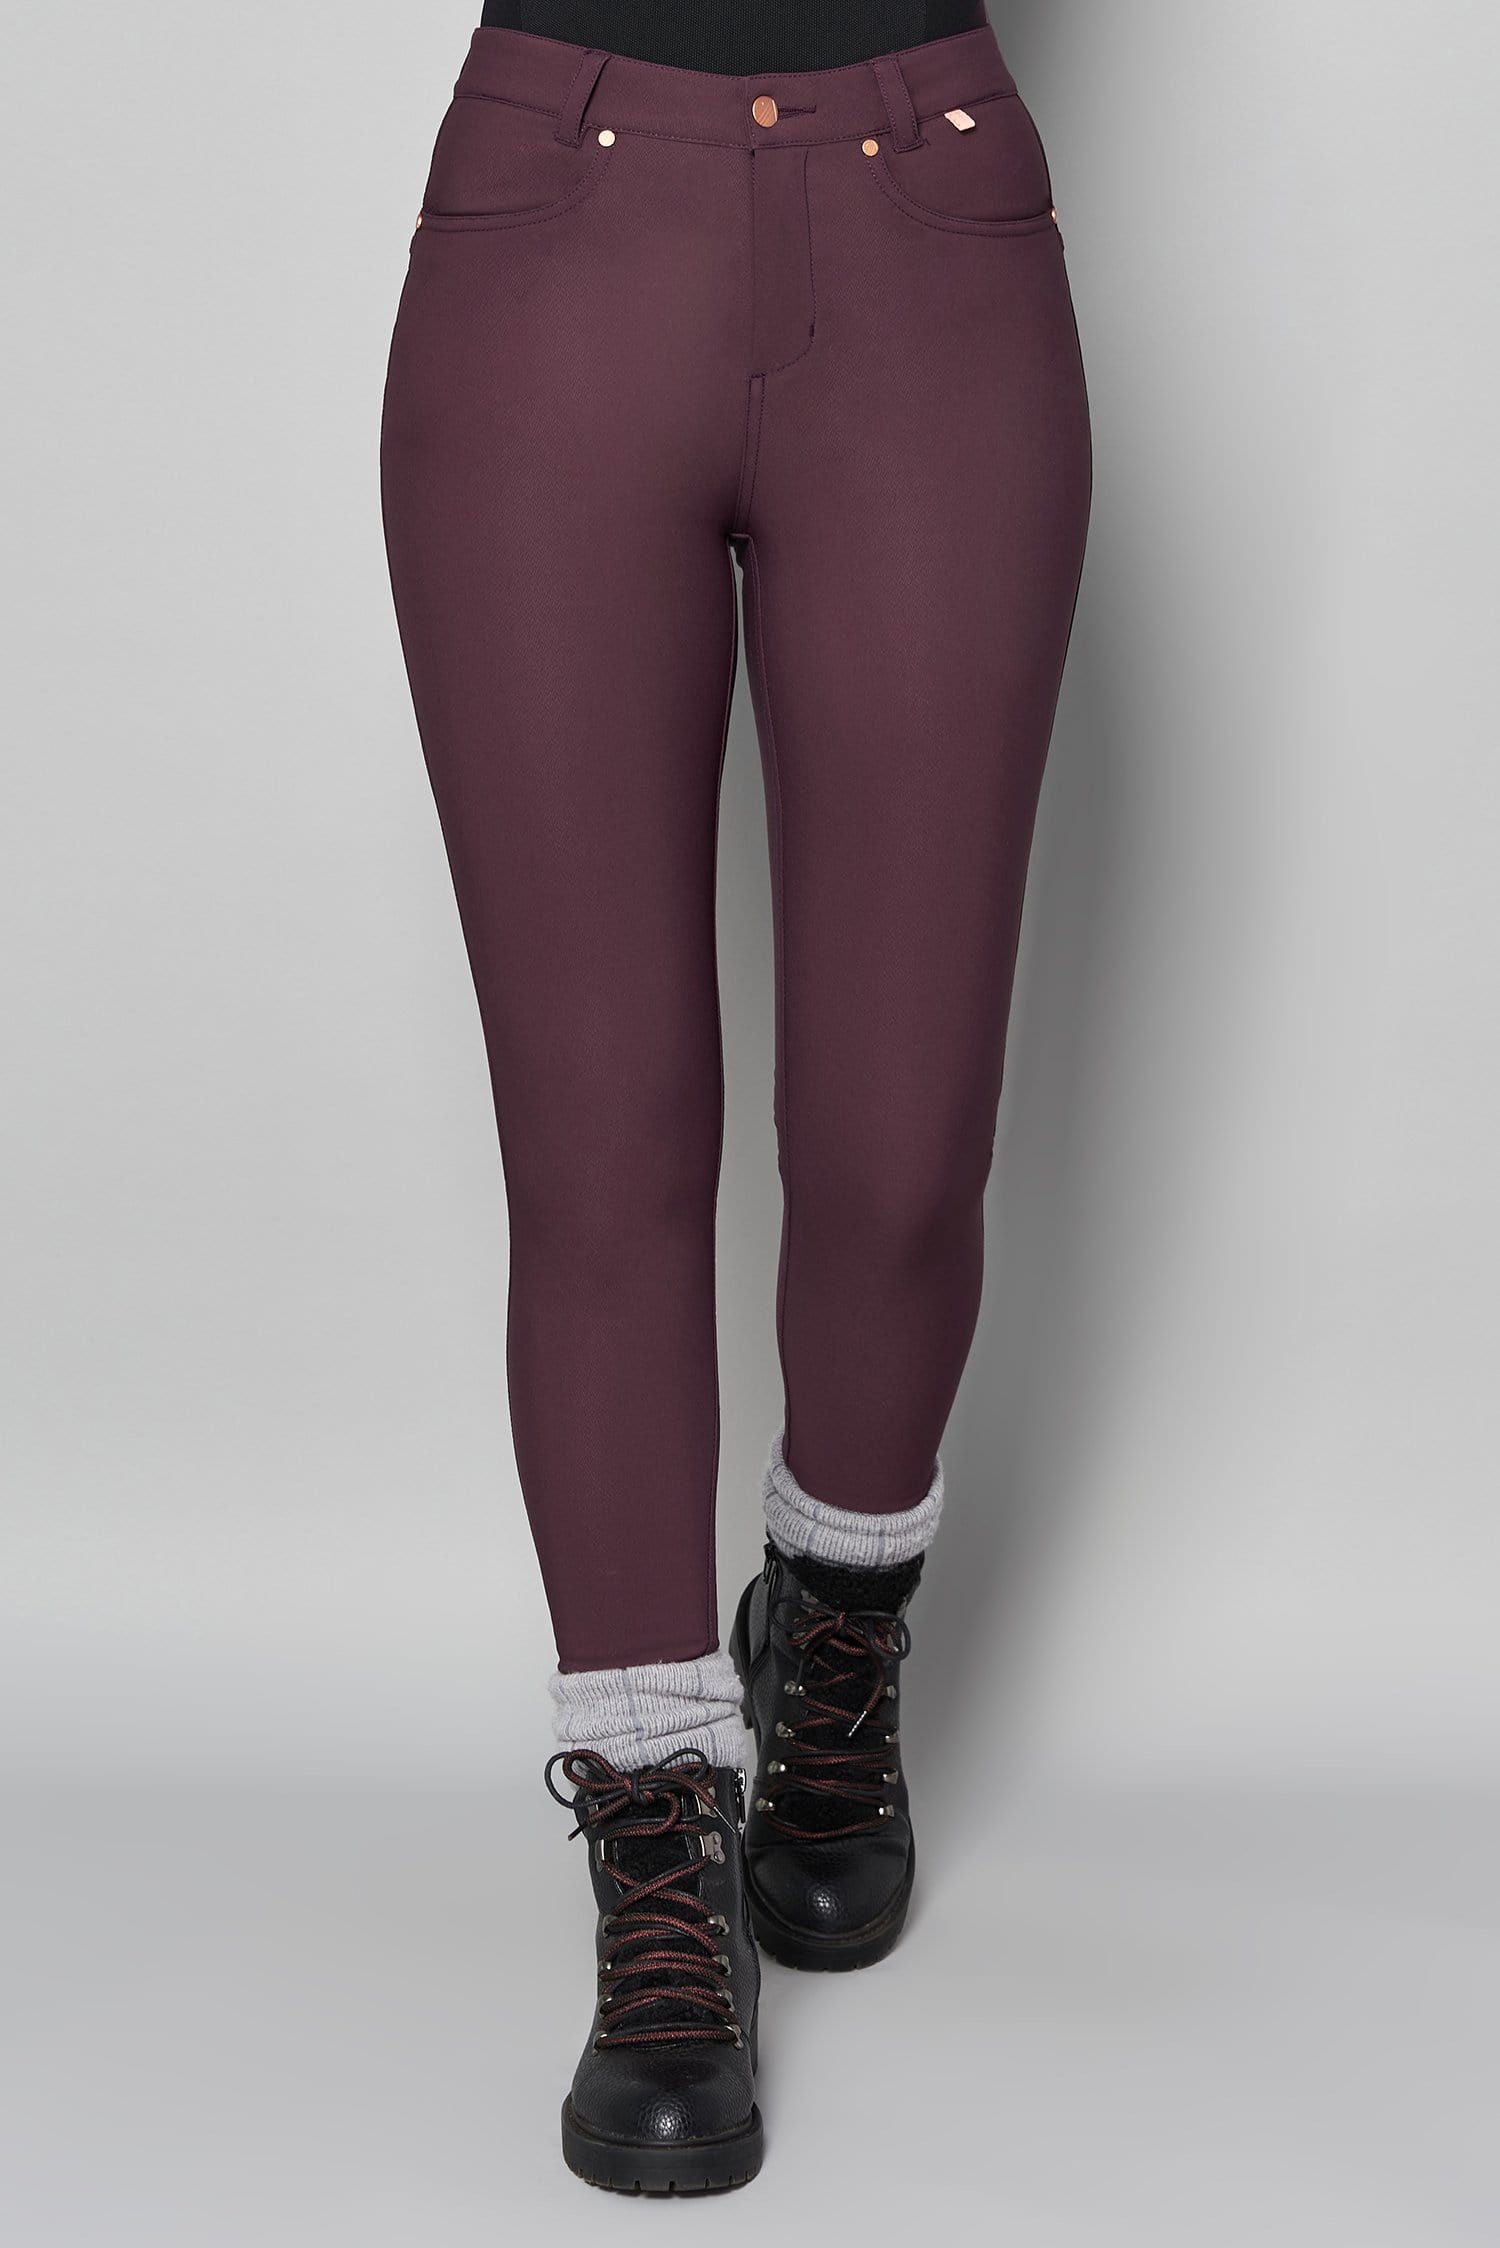 Thermal Skinny Outdoor Trousers - Aubergine - 24p / Uk6 - Womens - Acai Outdoorwear